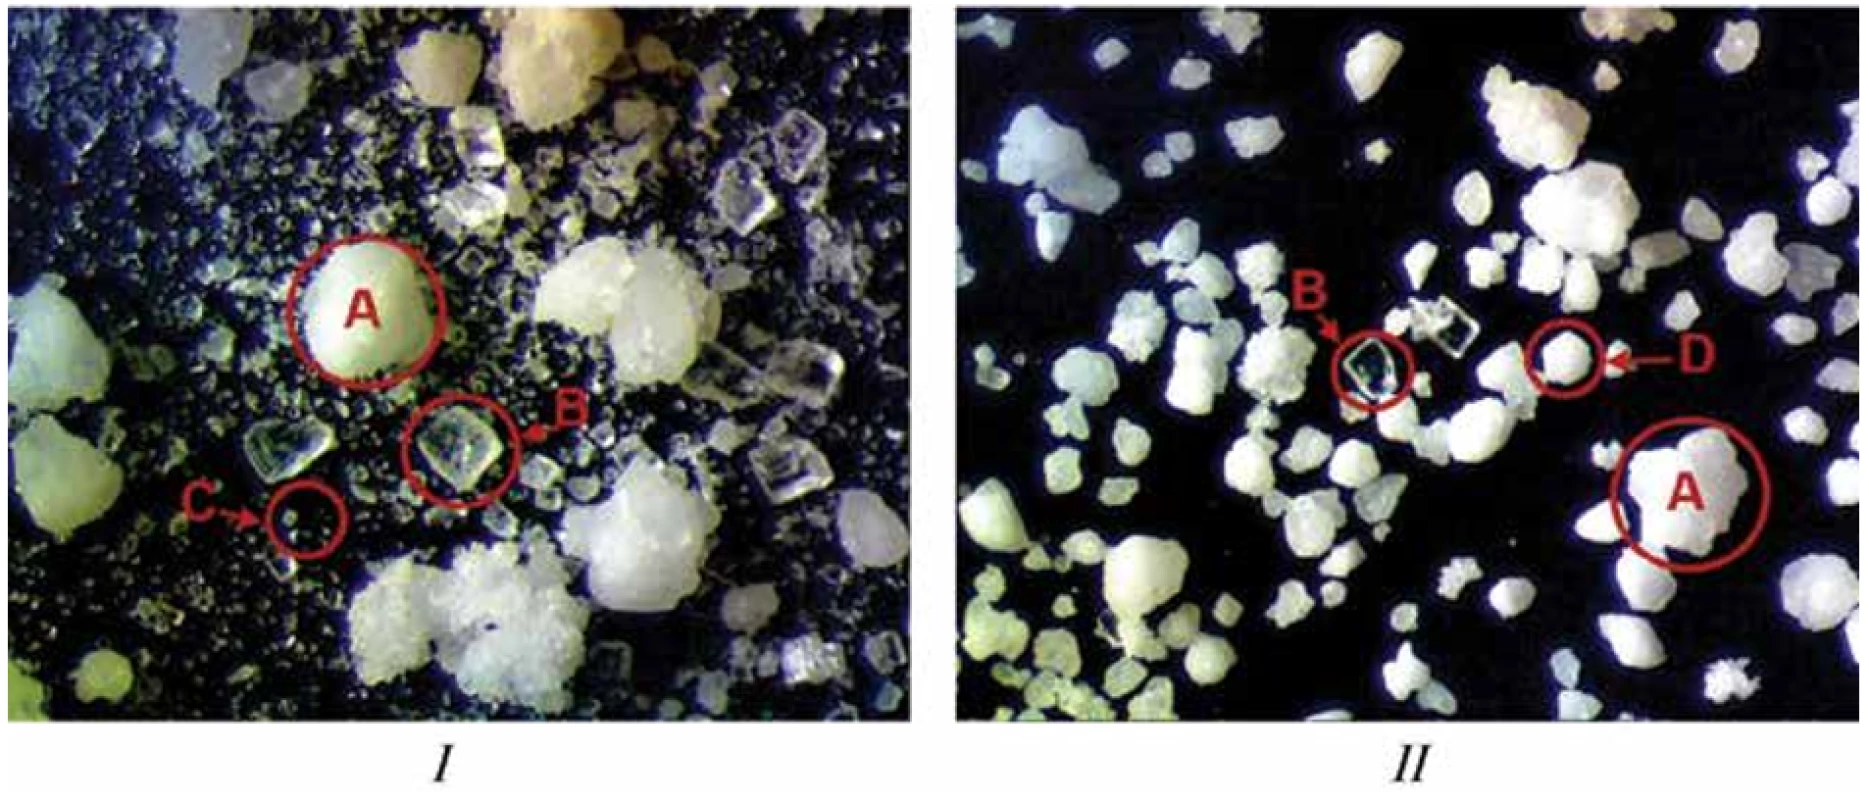 Optical microscopy characterization (3.3 times zoom) of particles: I – simple mixed blend (batch DC), II – blend prepared with the step of wet granulation (batch WG), A – HiG® particles, B – ascorbic acid particles, C – lysozyme hydrochloride and the rest excipient particles, D – granules obtained from lysozyme hydrochloride, sucralose, and taste additive